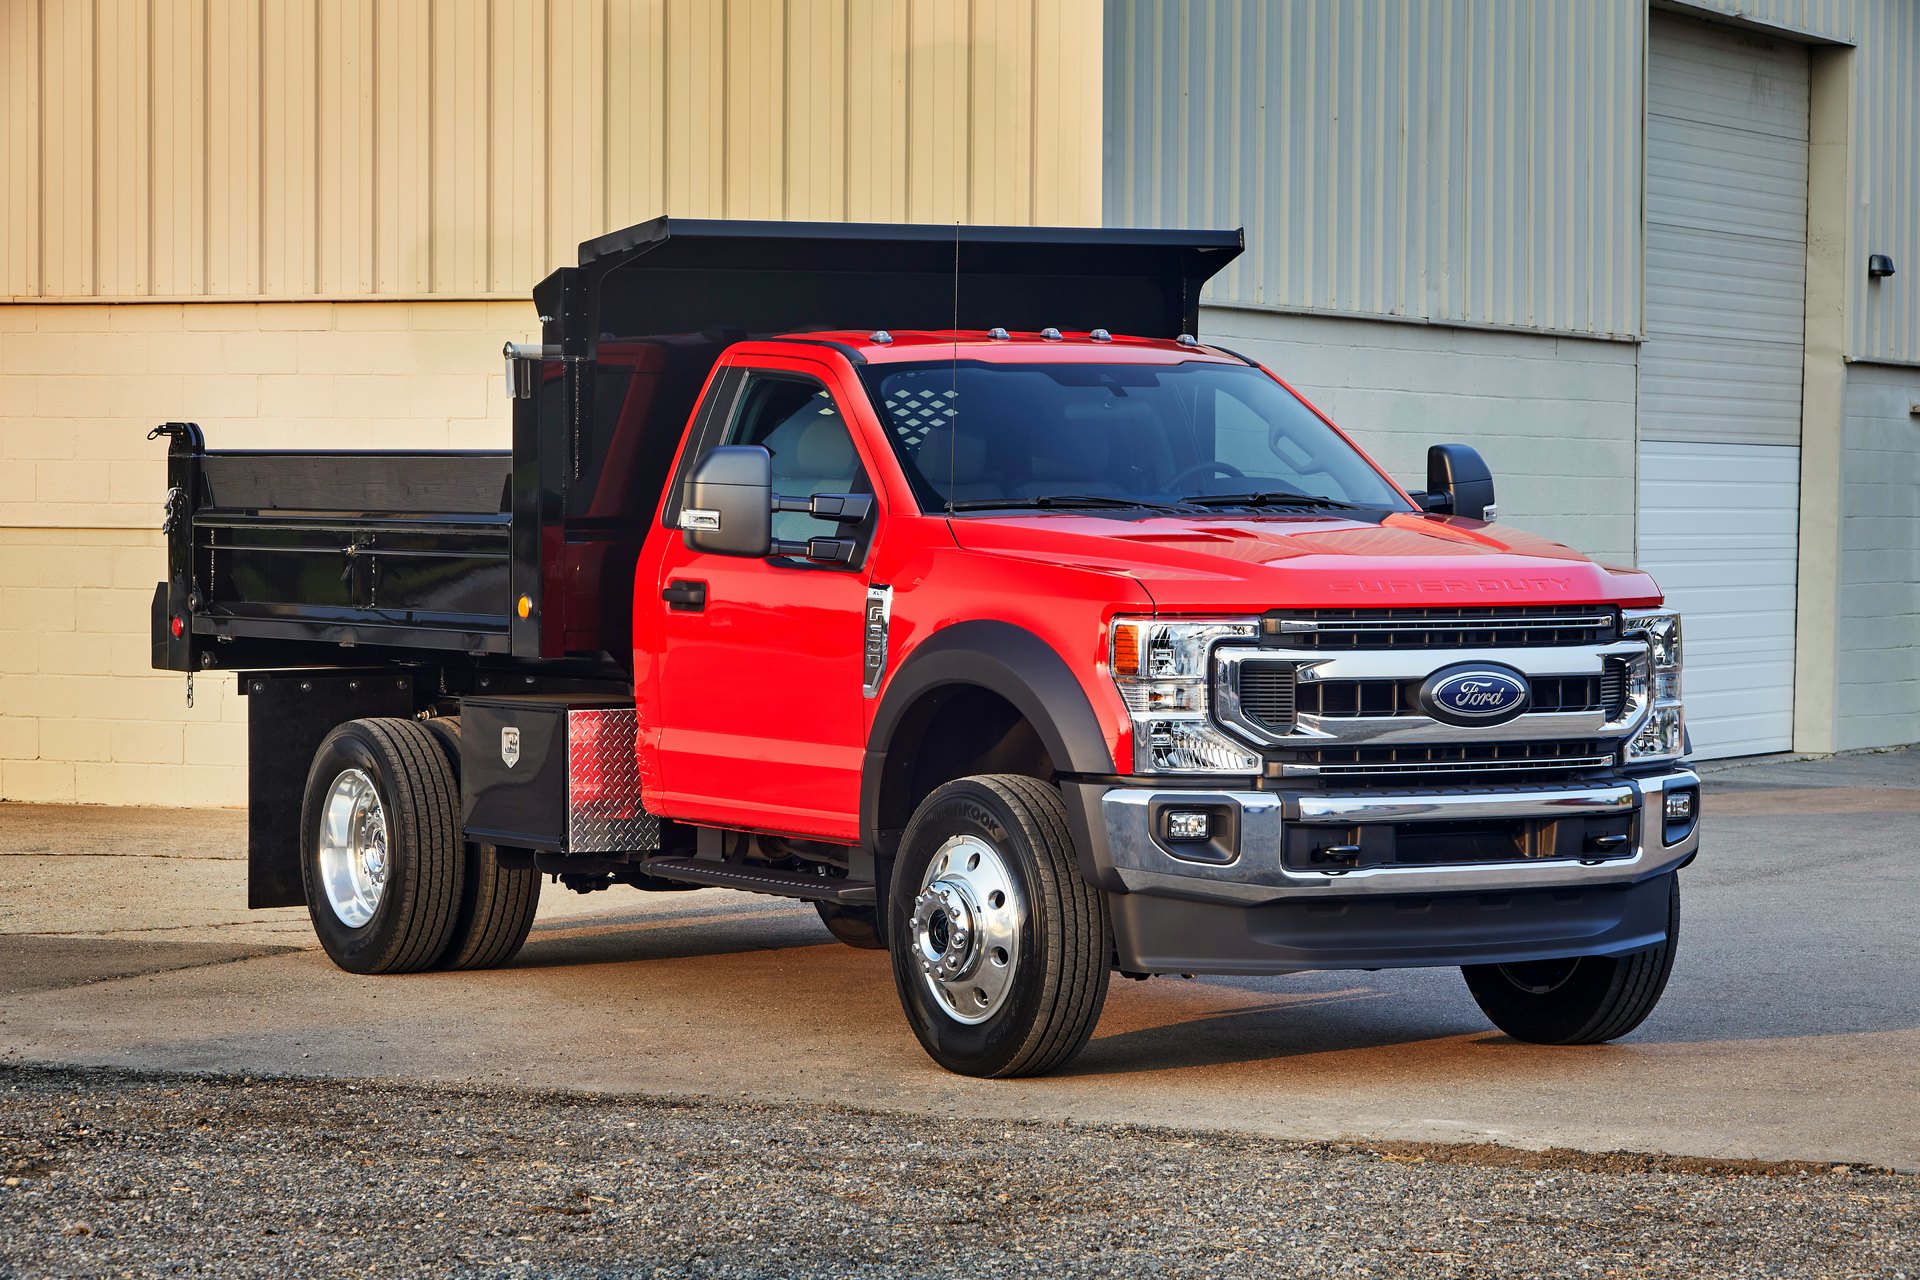 Class Straddling Ford F 600 Tows And Hauls More Than Any Other Super Duty Its Size From Ford Motor Company For Construction Pros